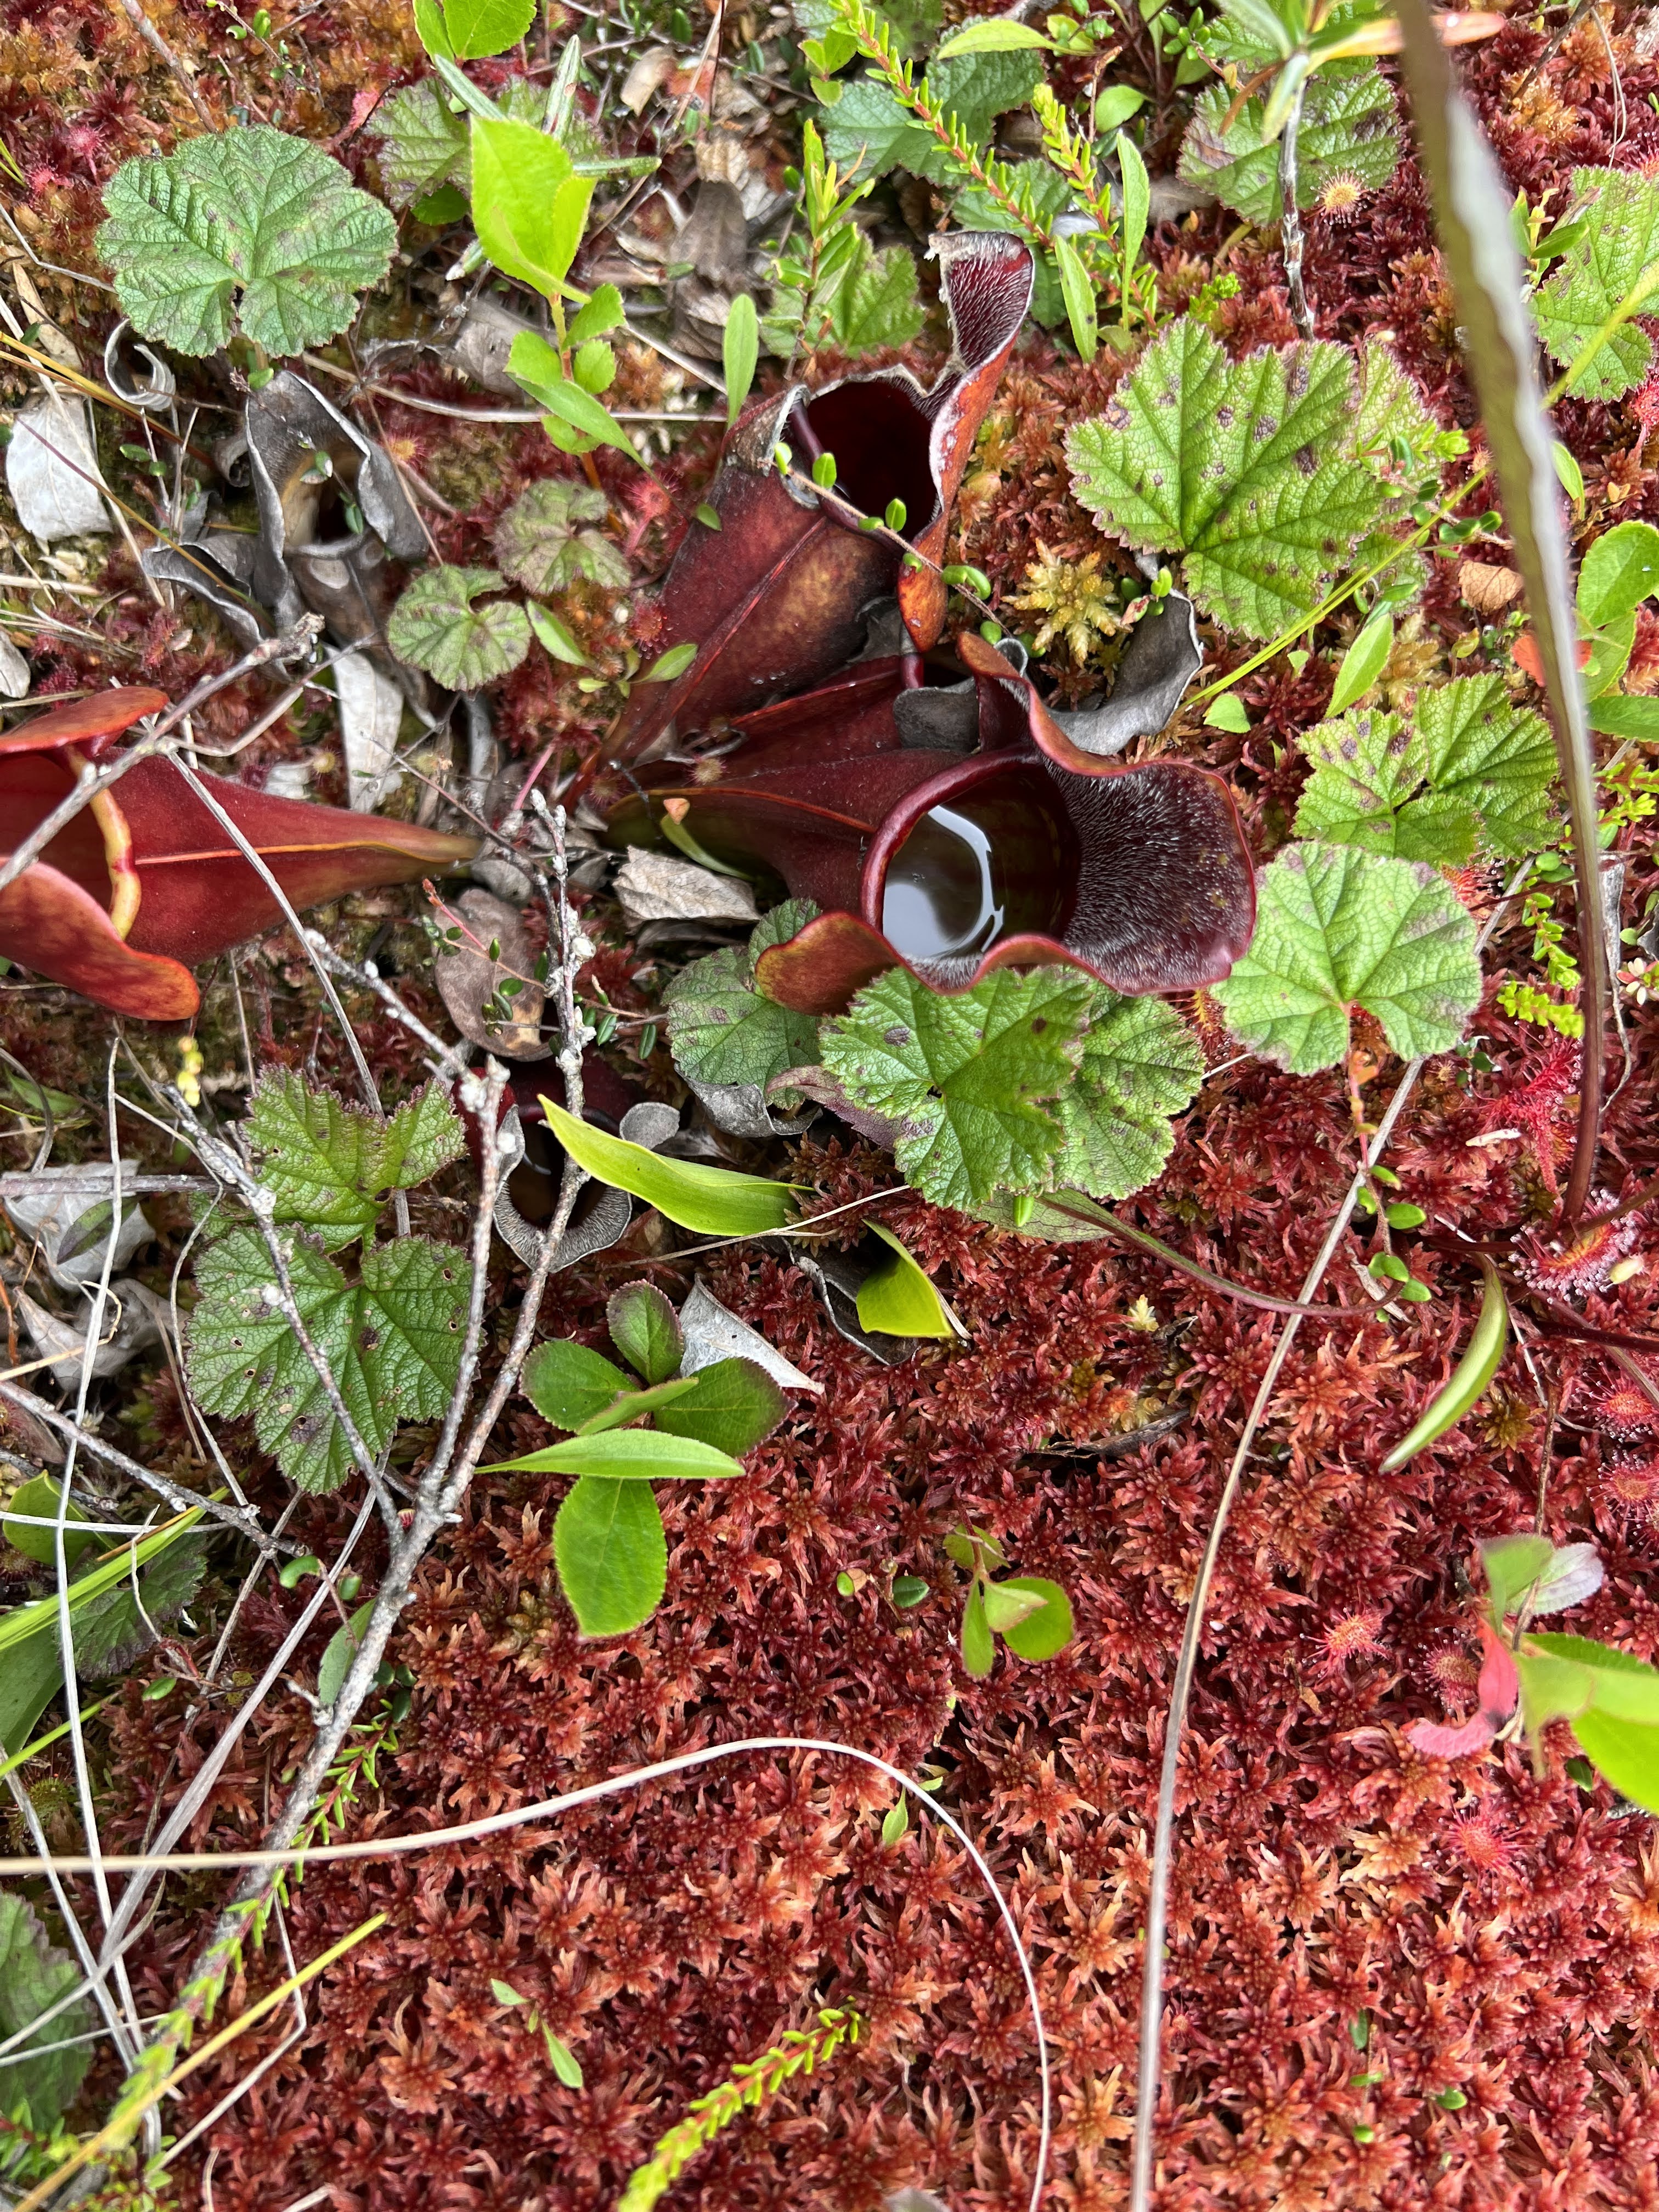 A close up of pitcher plants with water in them as well as sundews and lichens